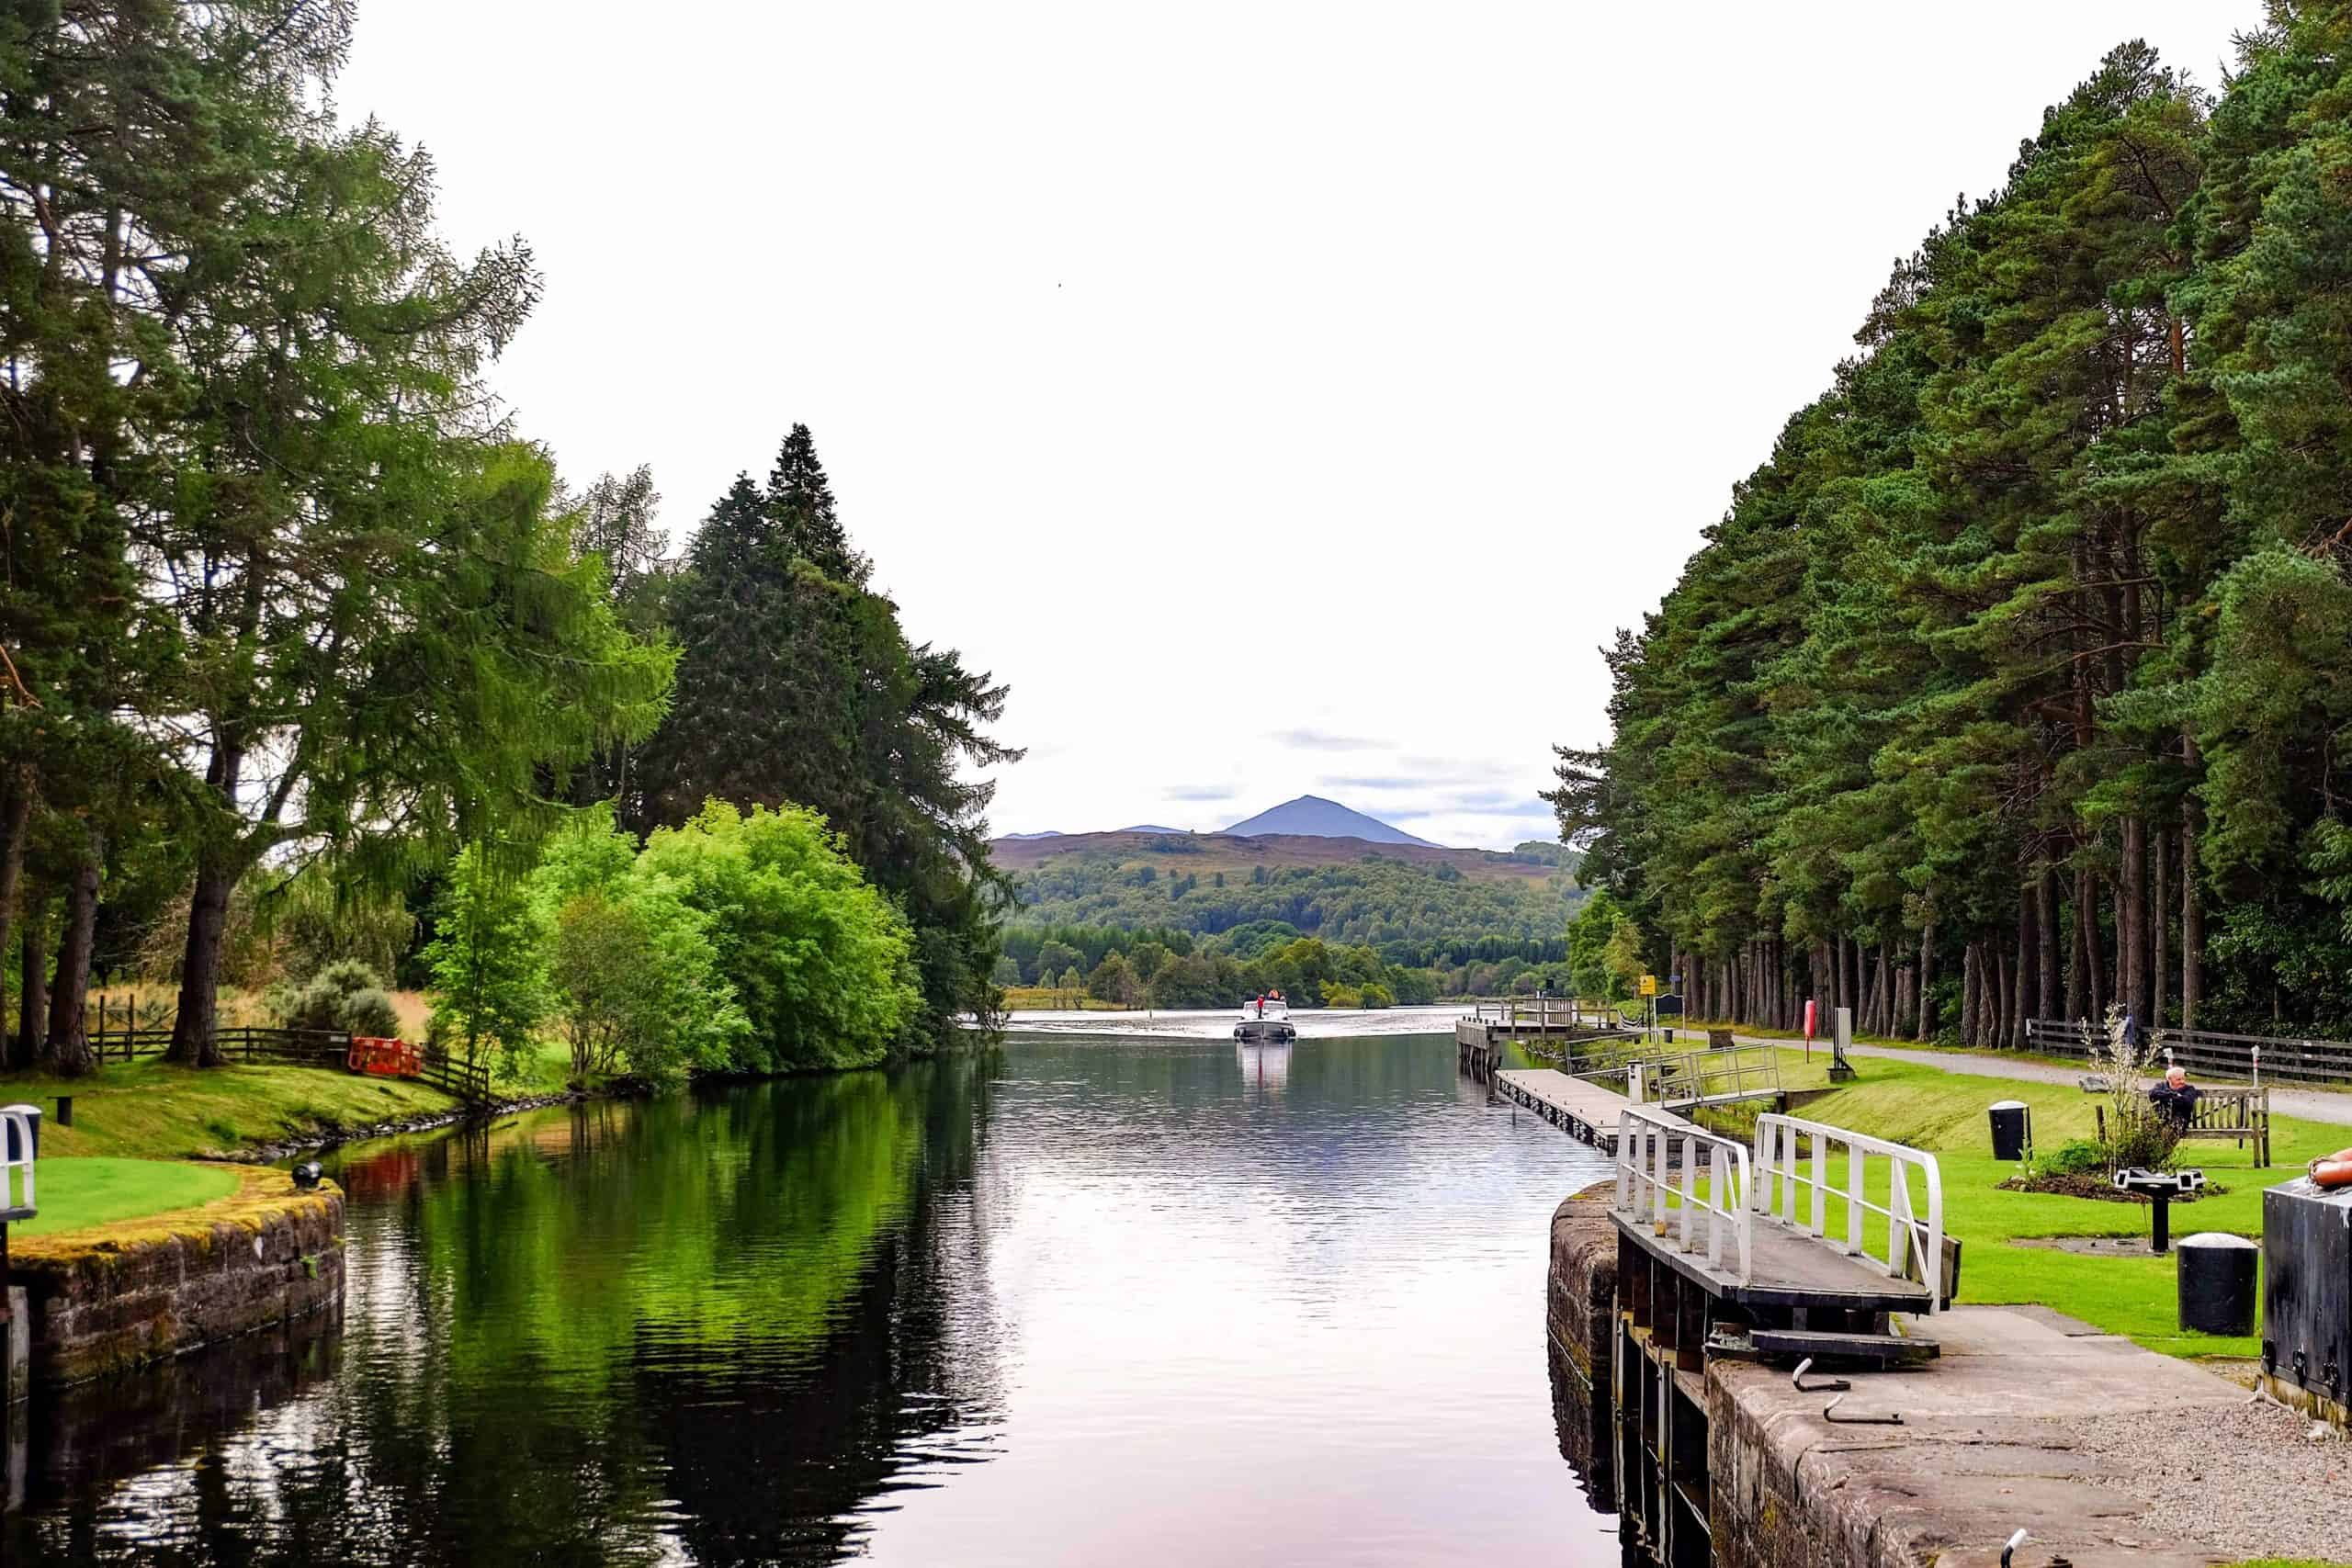 caledonian canal day trip